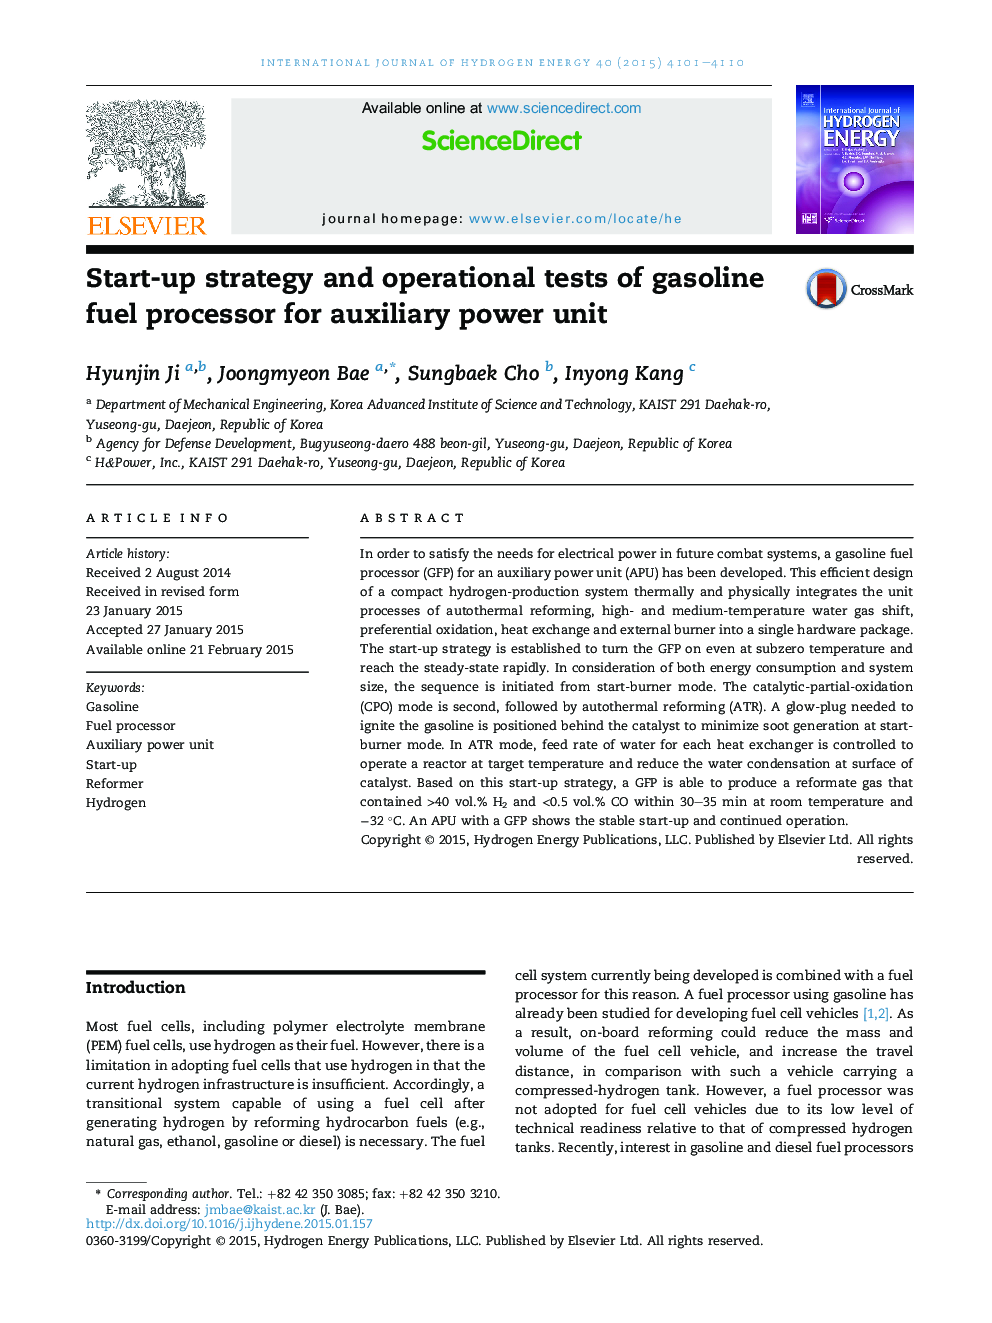 Start-up strategy and operational tests of gasoline fuel processor for auxiliary power unit